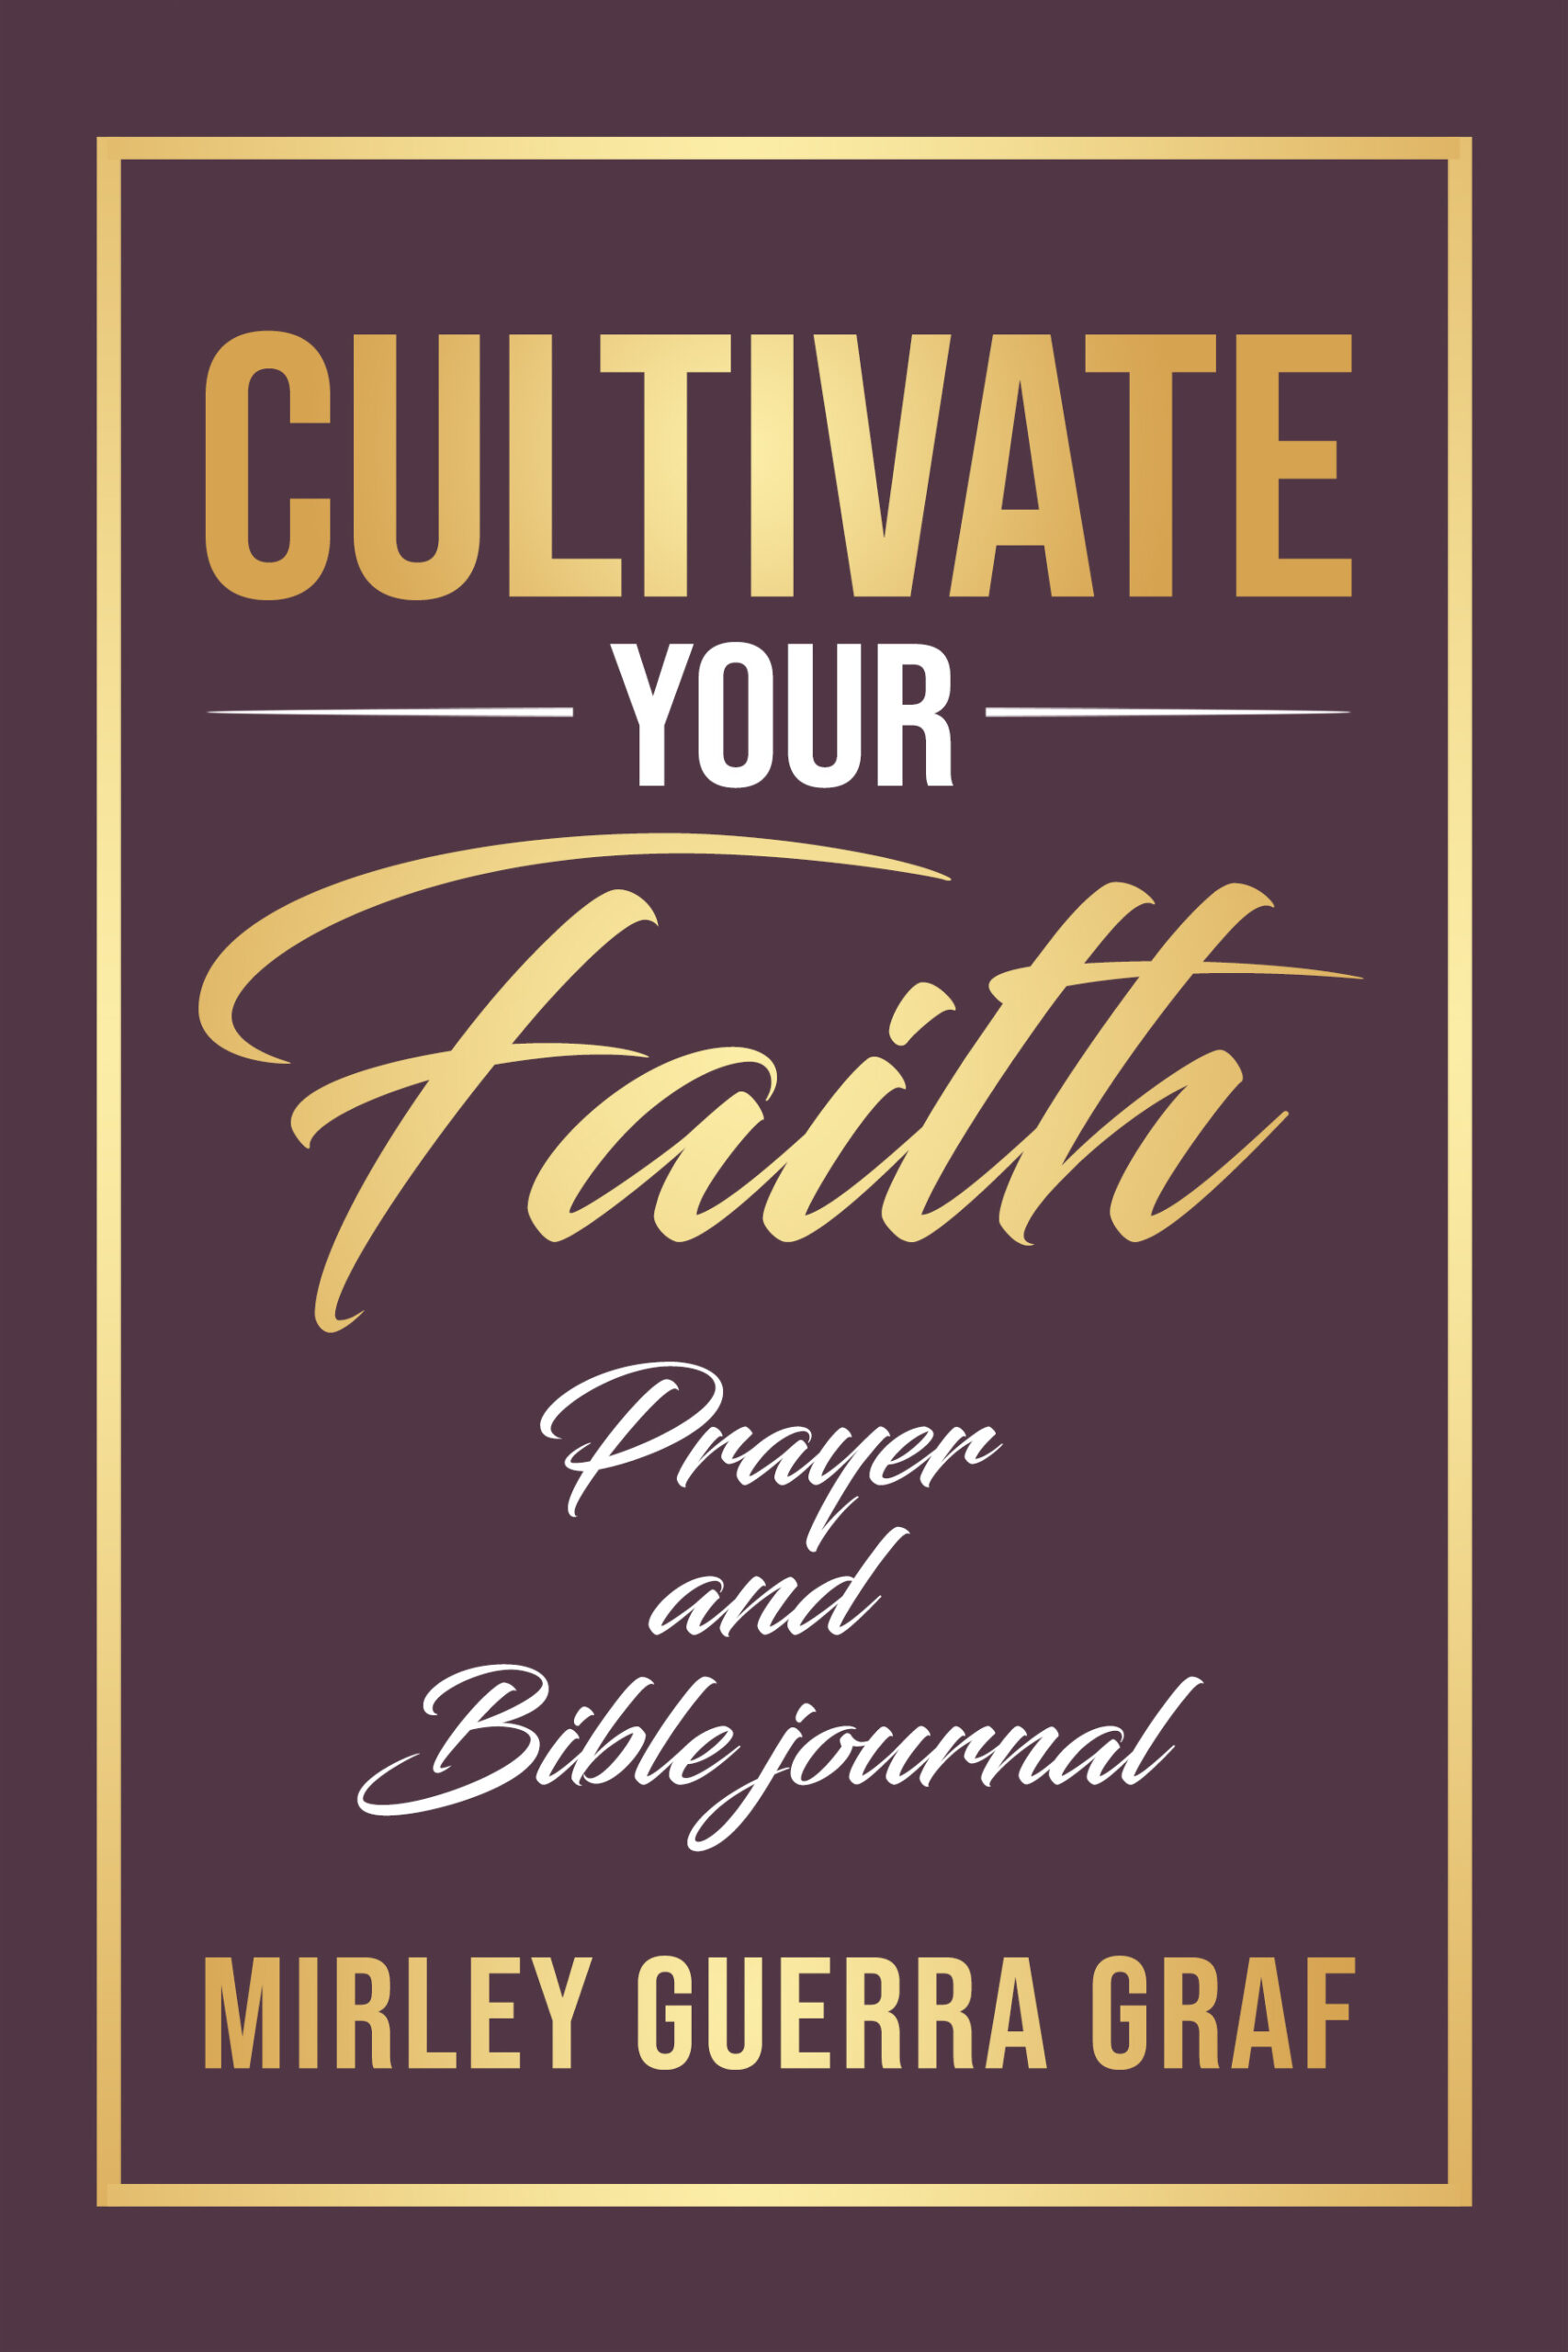 FREE: Cultivate Your Faith: Prayer and Bible Journal by Mirley Guerra Graf